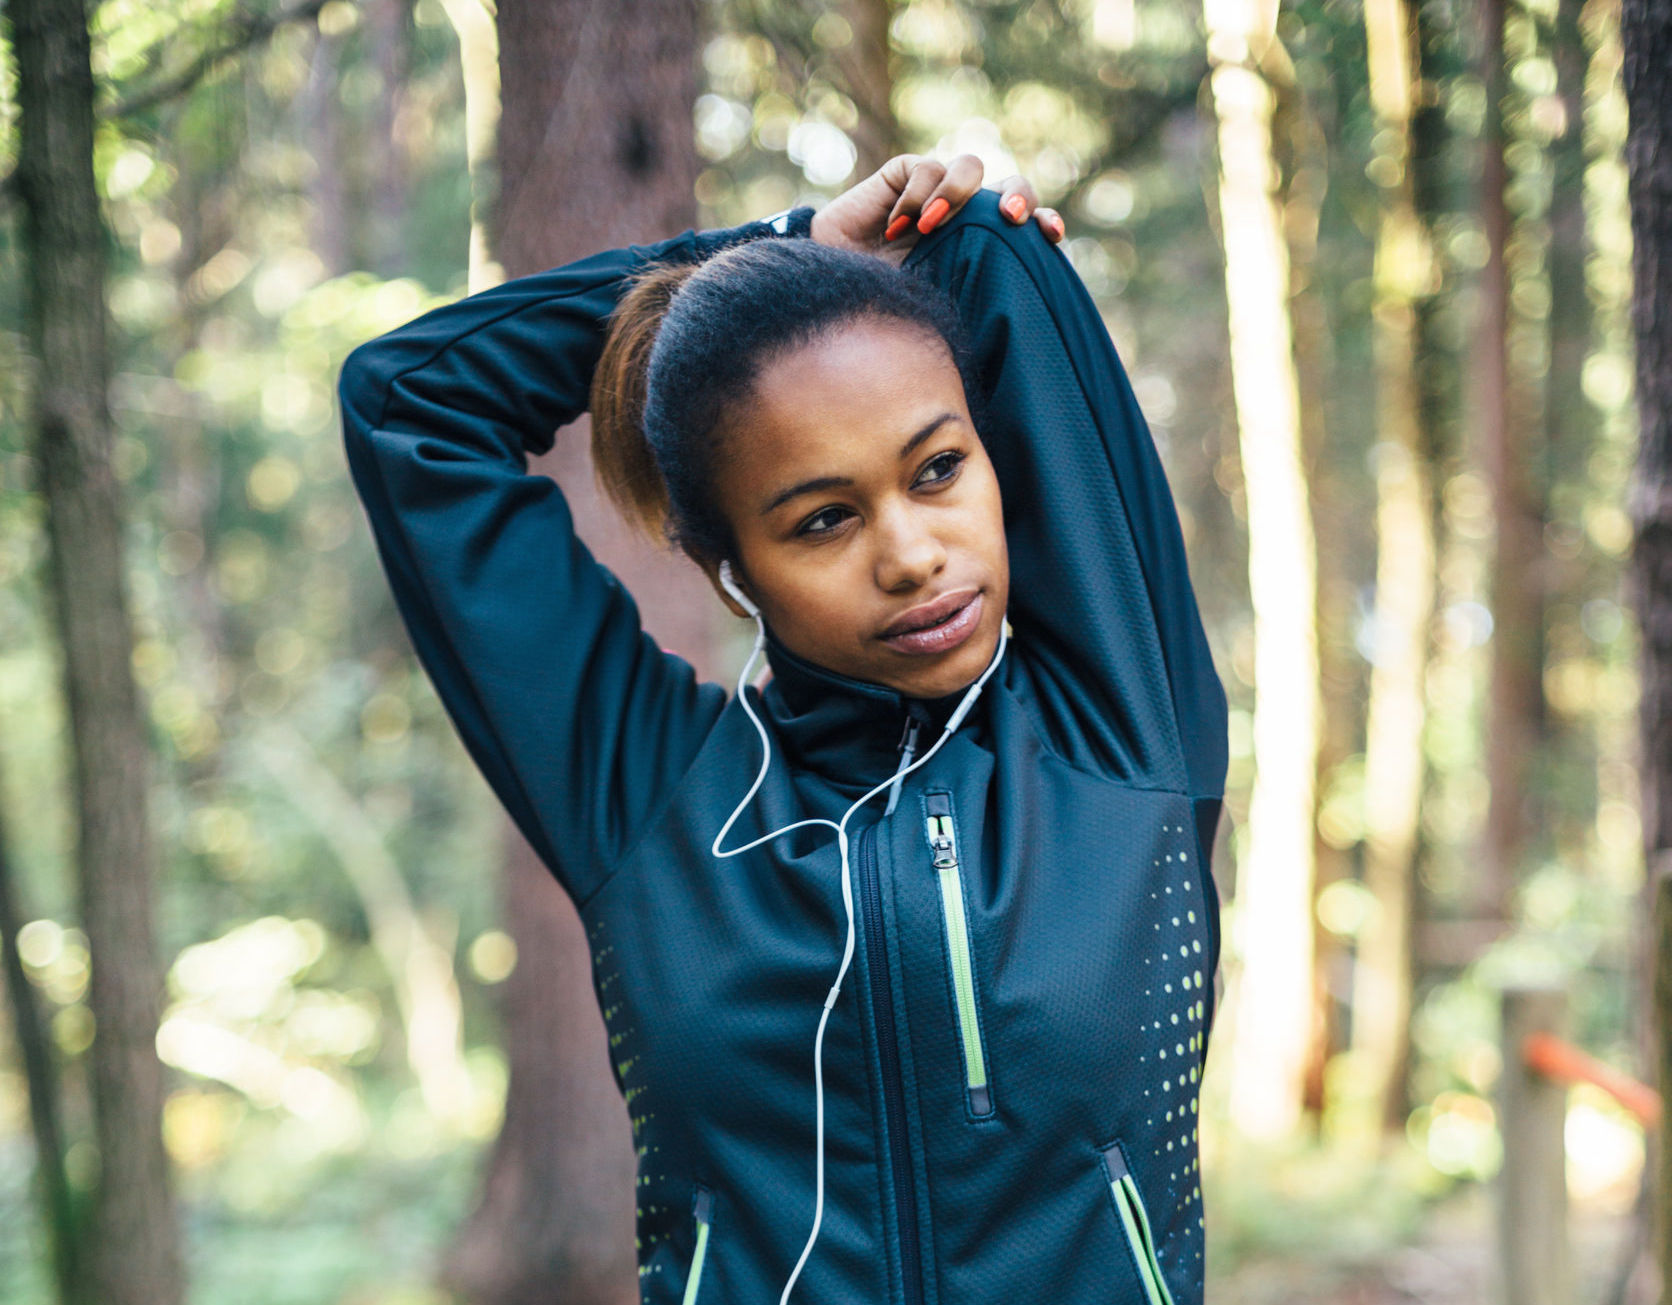 8 things runners should say “NO” to in 2016 | JustRunLah!